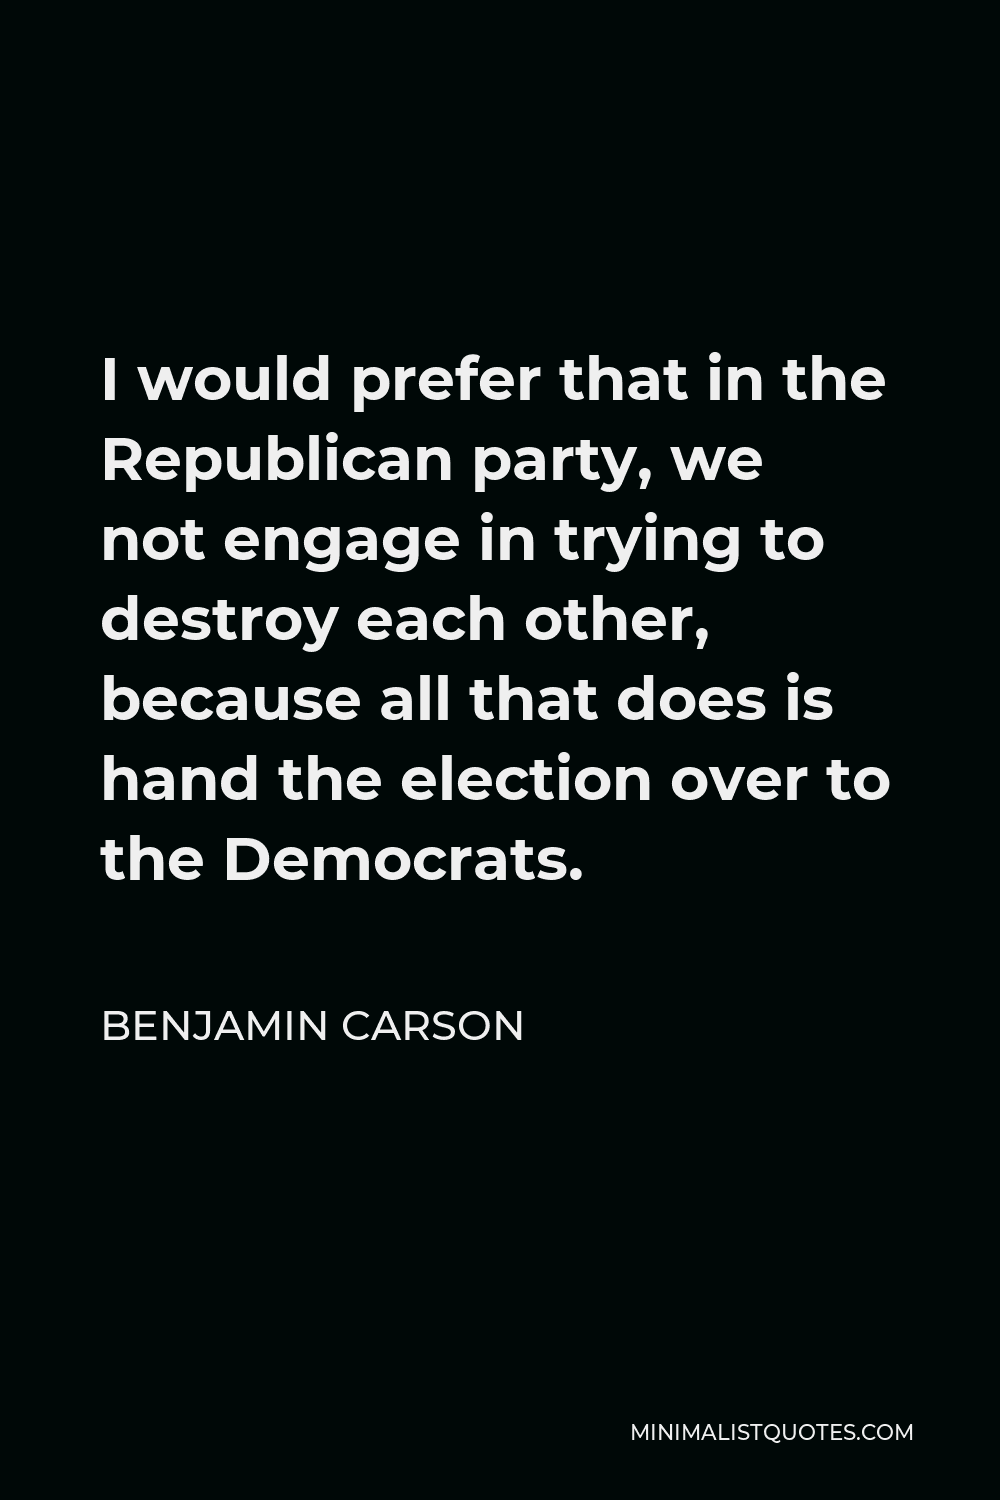 Benjamin Carson Quote - I would prefer that in the Republican party, we not engage in trying to destroy each other, because all that does is hand the election over to the Democrats.